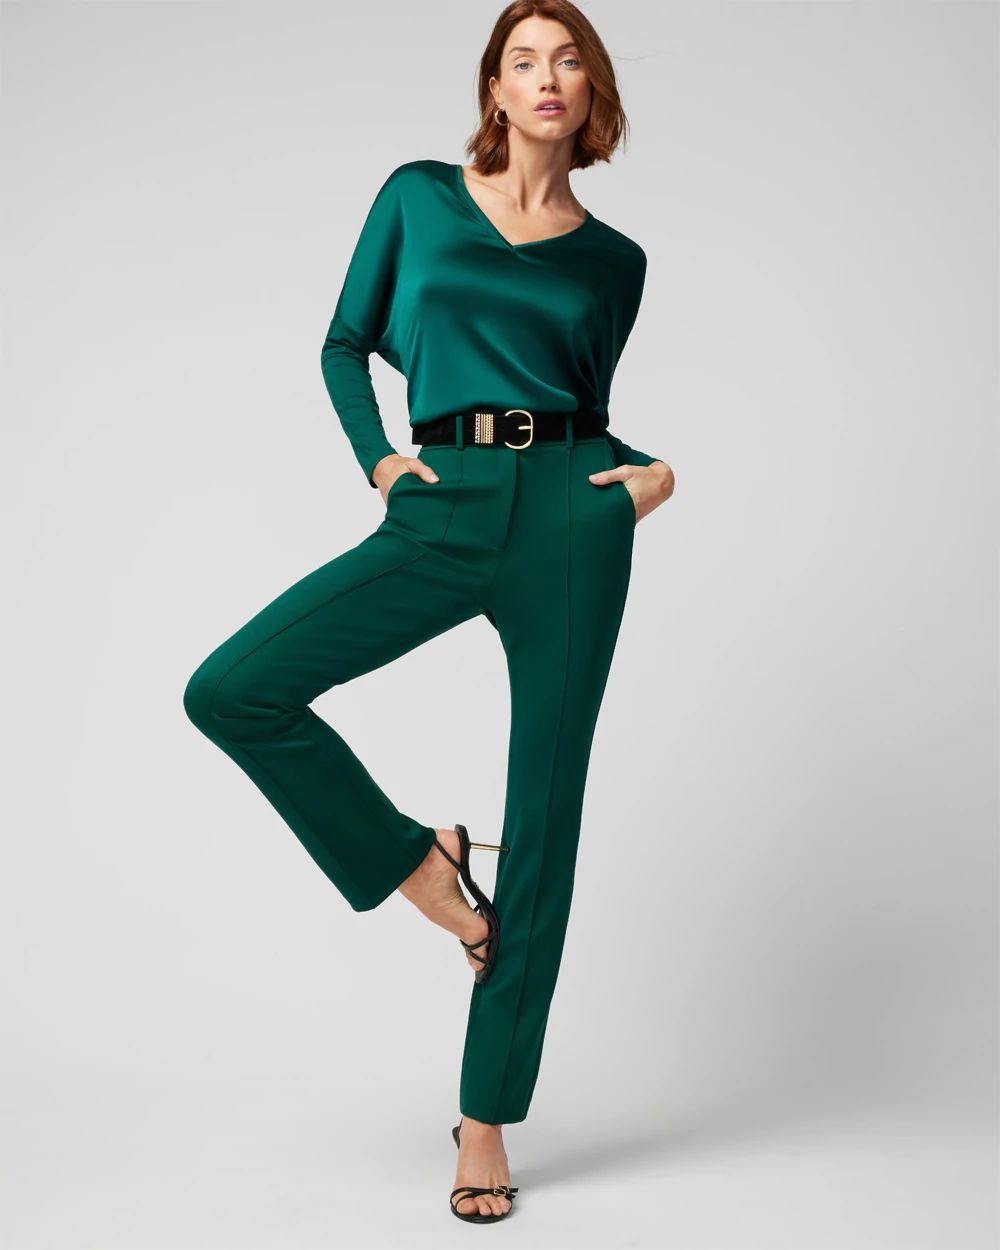 Extra High-Rise Luxe Stretch Bootcut Pants click to view larger image.